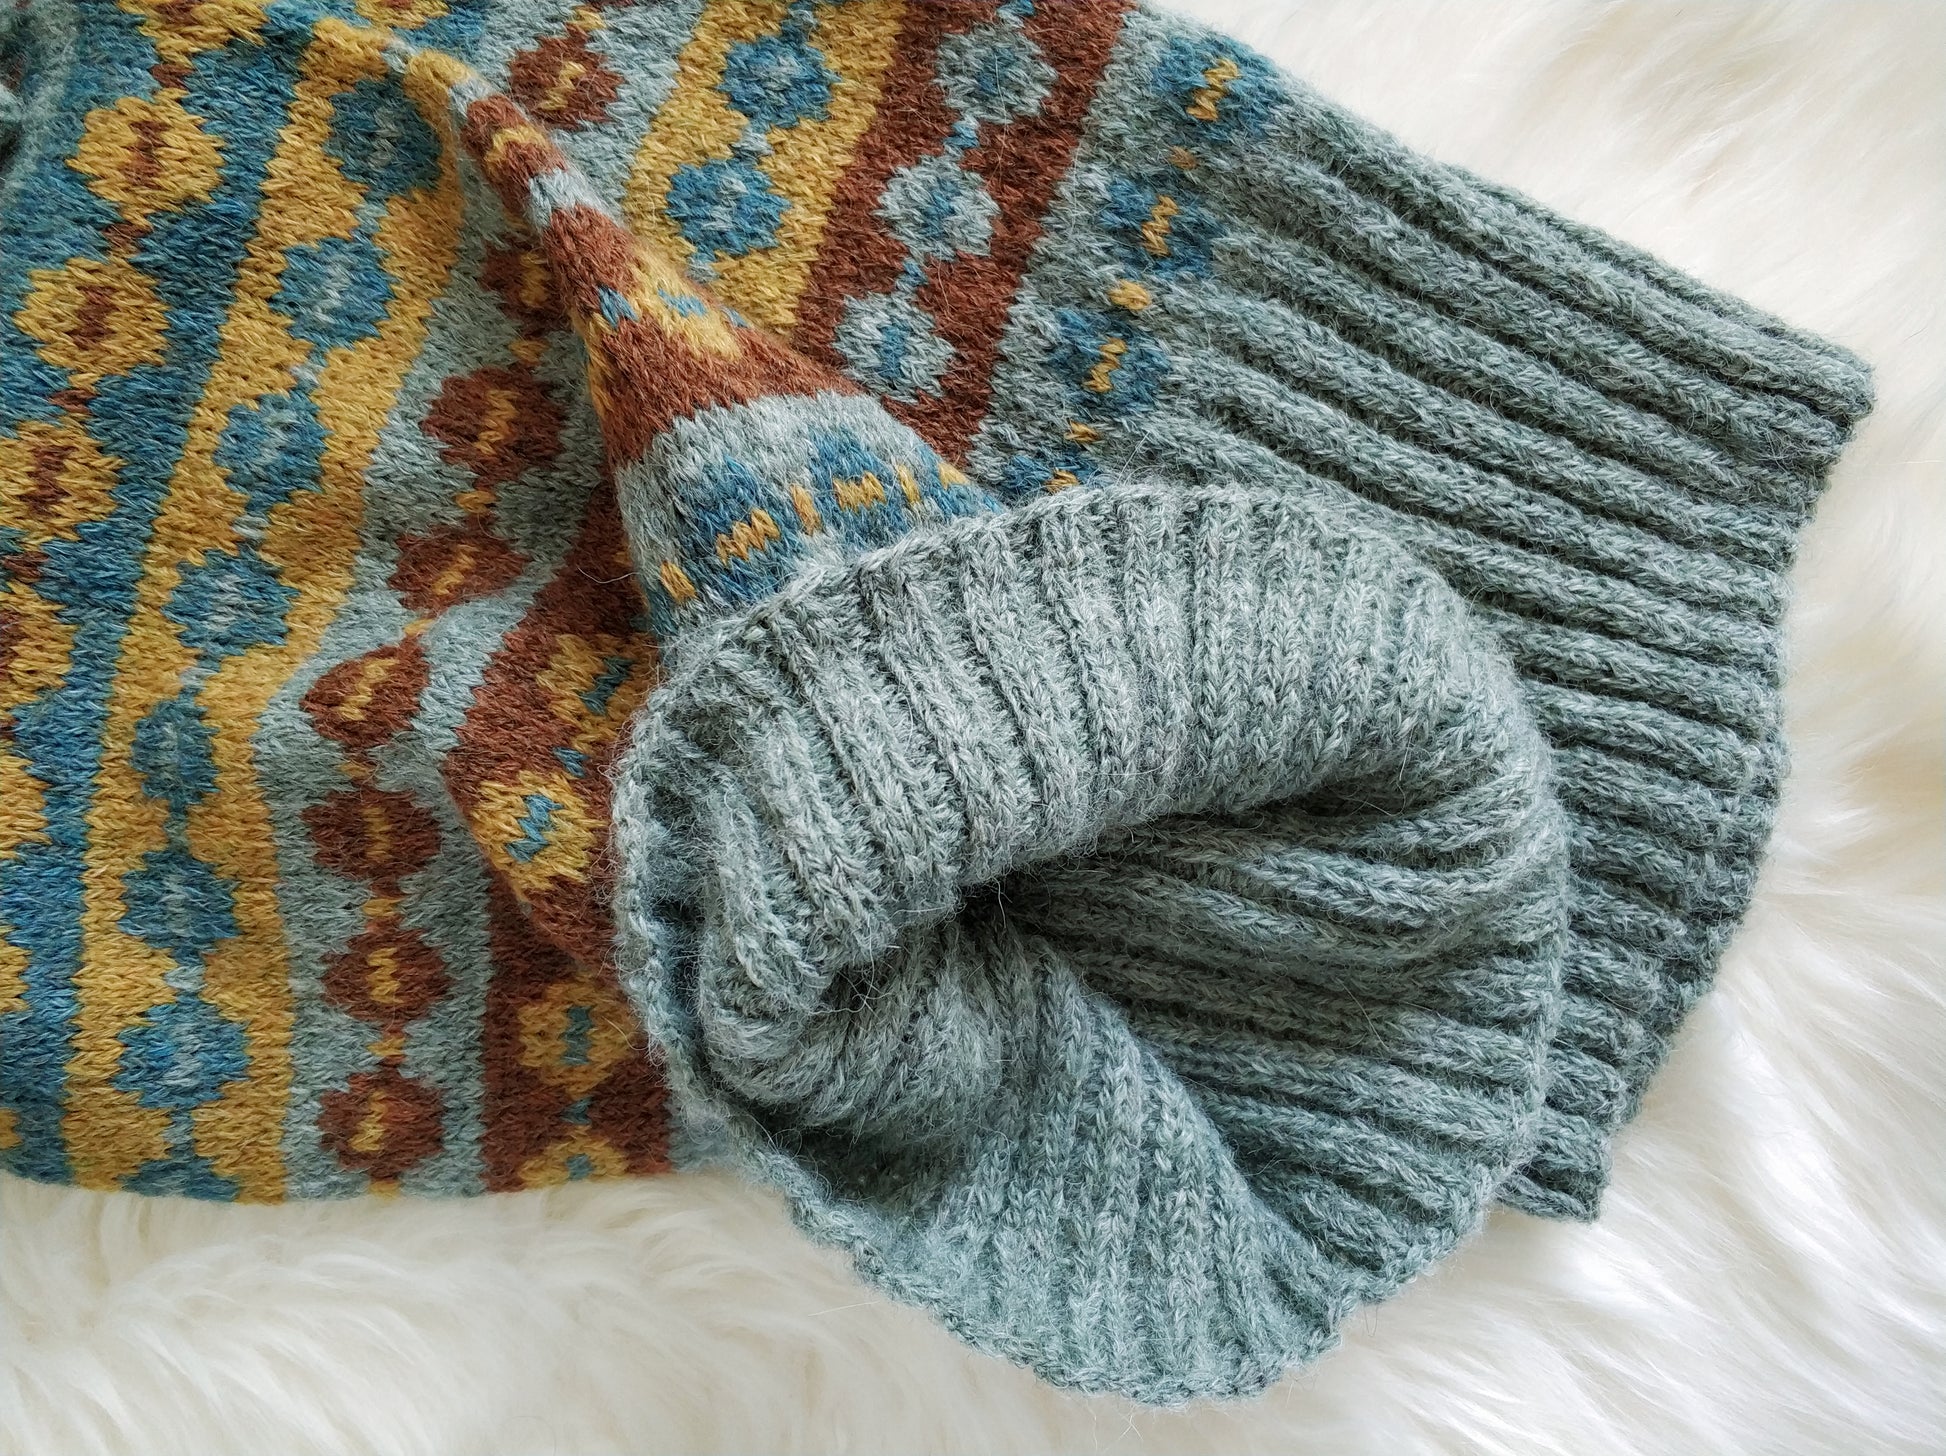 Grey, brown, yellow and blue alpaca wool hand-knitted Fair Isle long double layered scarf